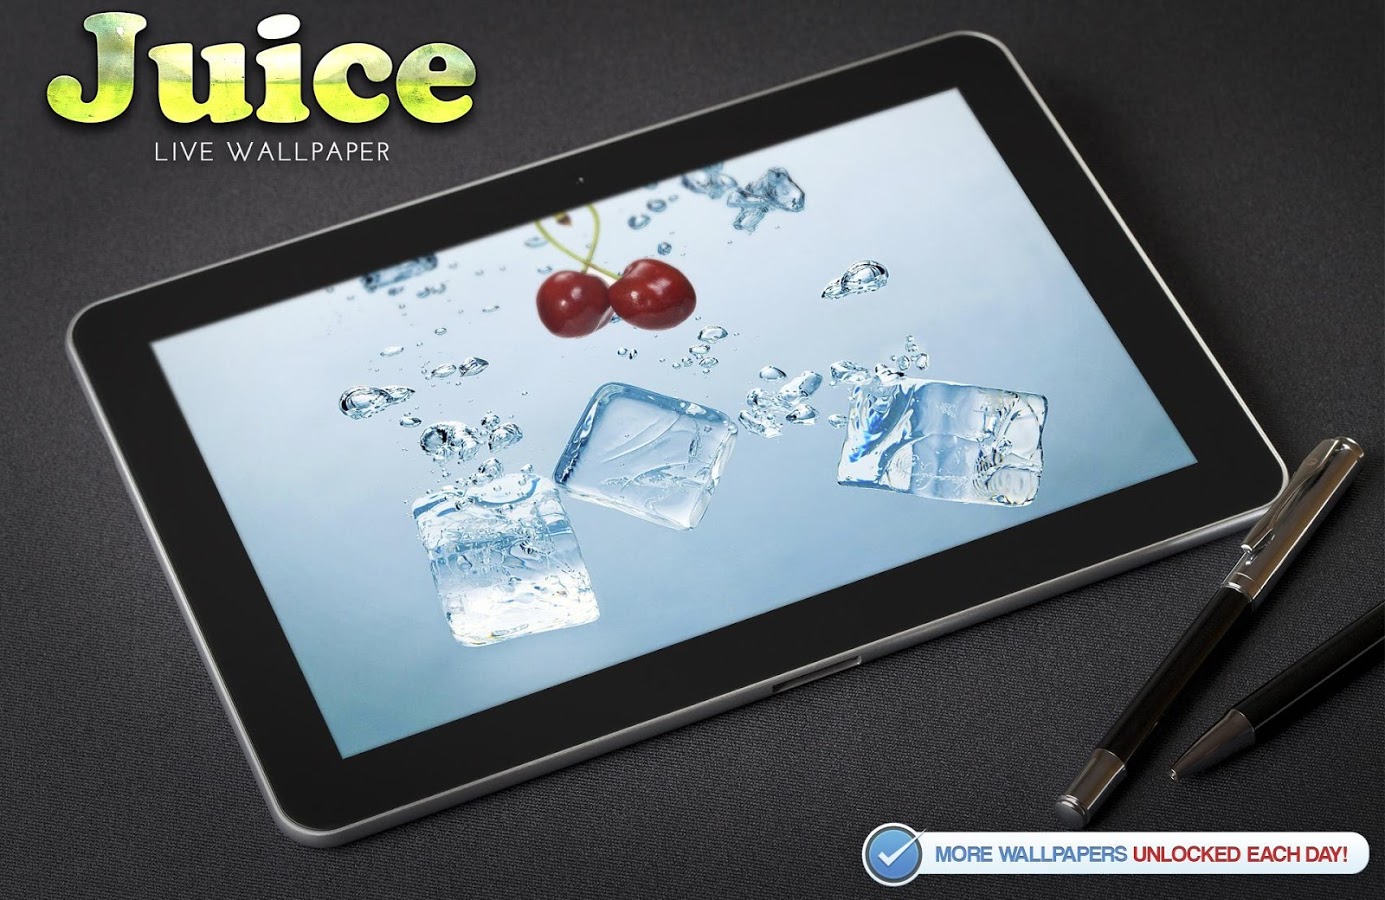 juice live wallpaper,ipad,product,gadget,tablet computer,electronic device